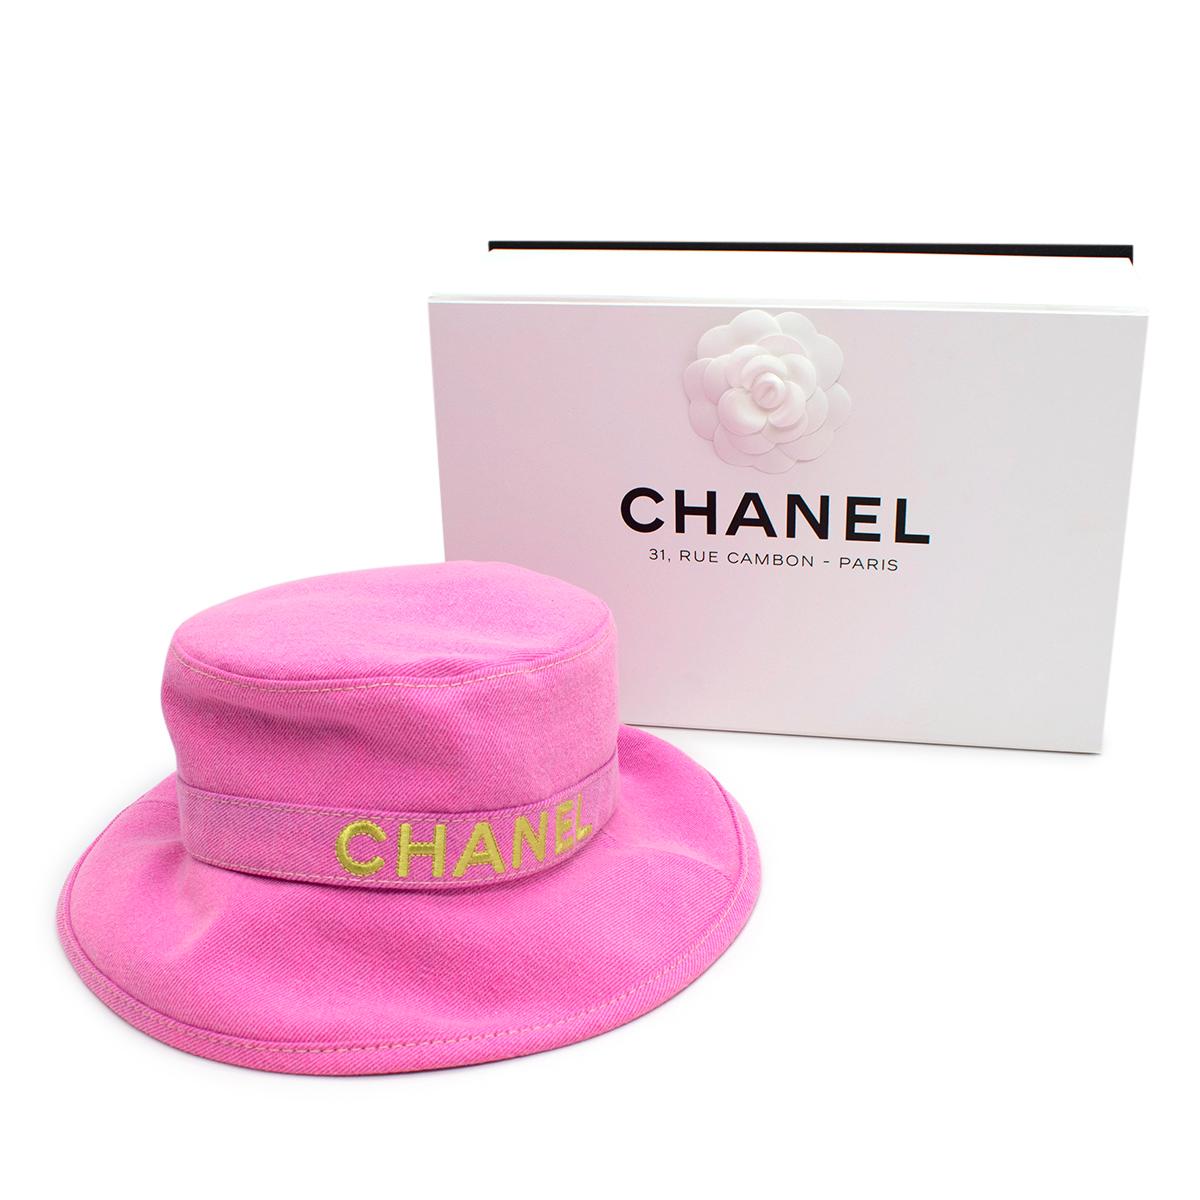 Chanel Pink Cotton Bucket Hat - Rare

- Tonal stitching
- Embroidered yellow Chanel logo at the front
- Partially lined

Materials:
100% Cotton

PLEASE NOTE, THESE ITEMS ARE PRE-OWNED AND MAY SHOW SIGNS
OF BEING STORED EVEN WHEN UNWORN AND UNUSED.